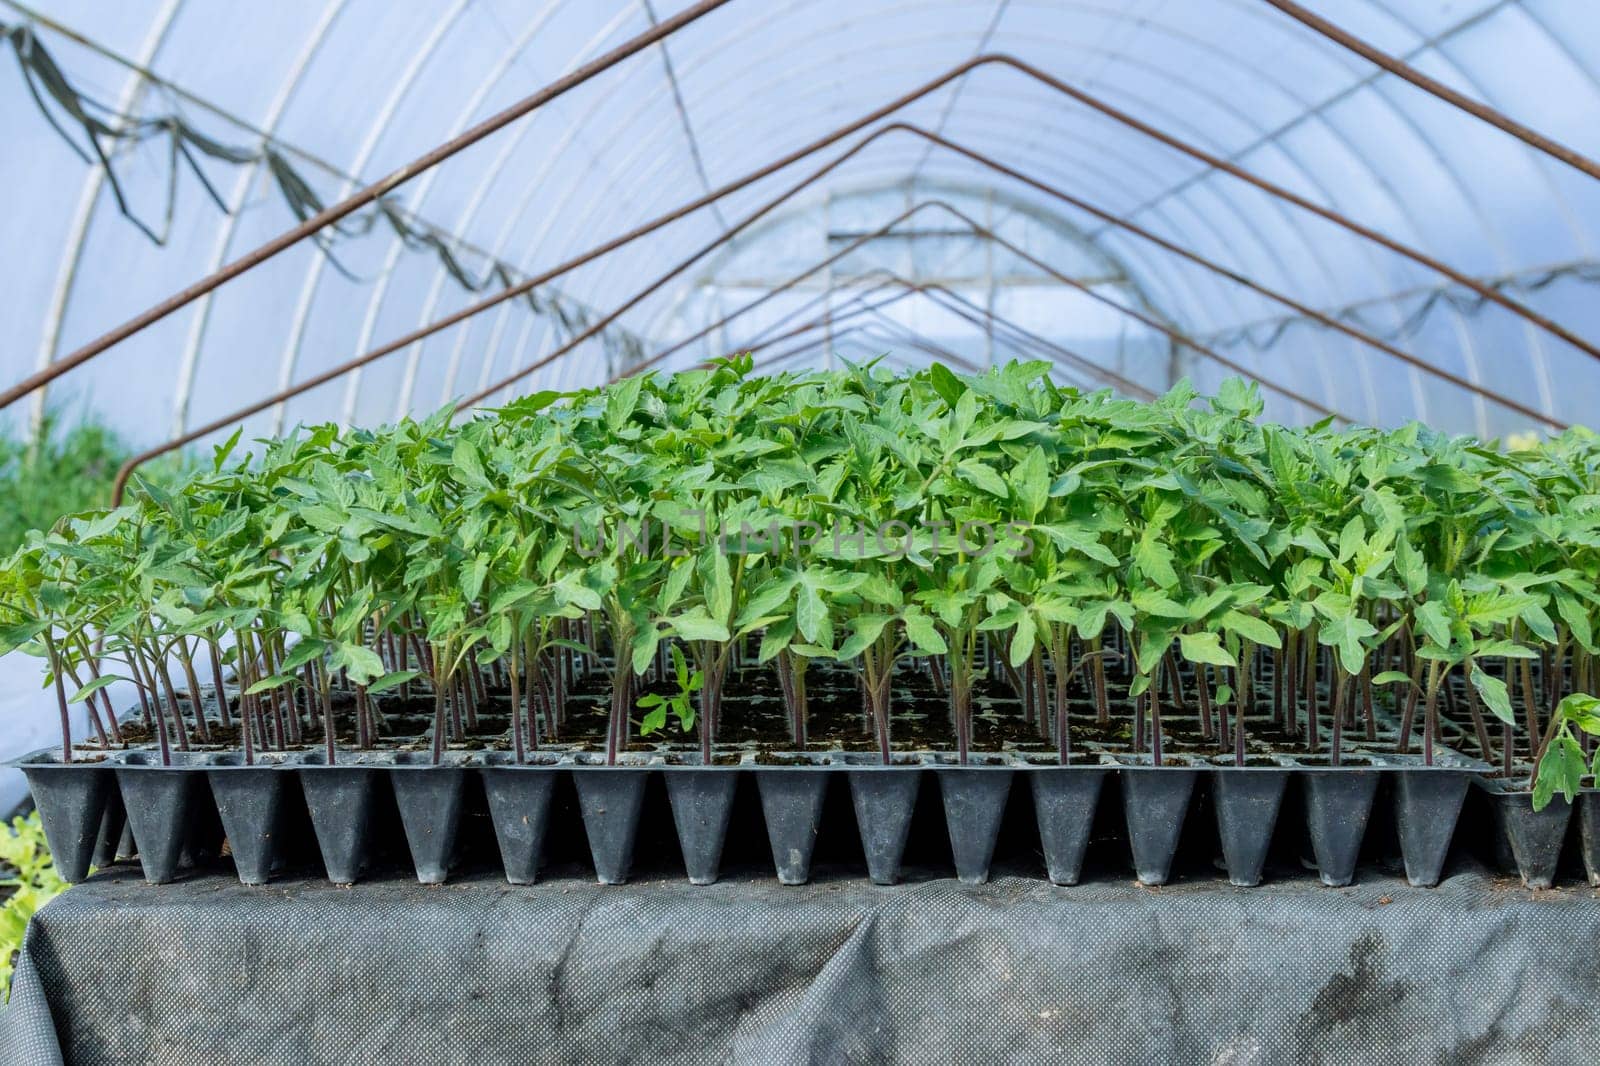 Greenhouse environment provides ideal conditions for tomatoes to develop into healthy, ripe fruits.